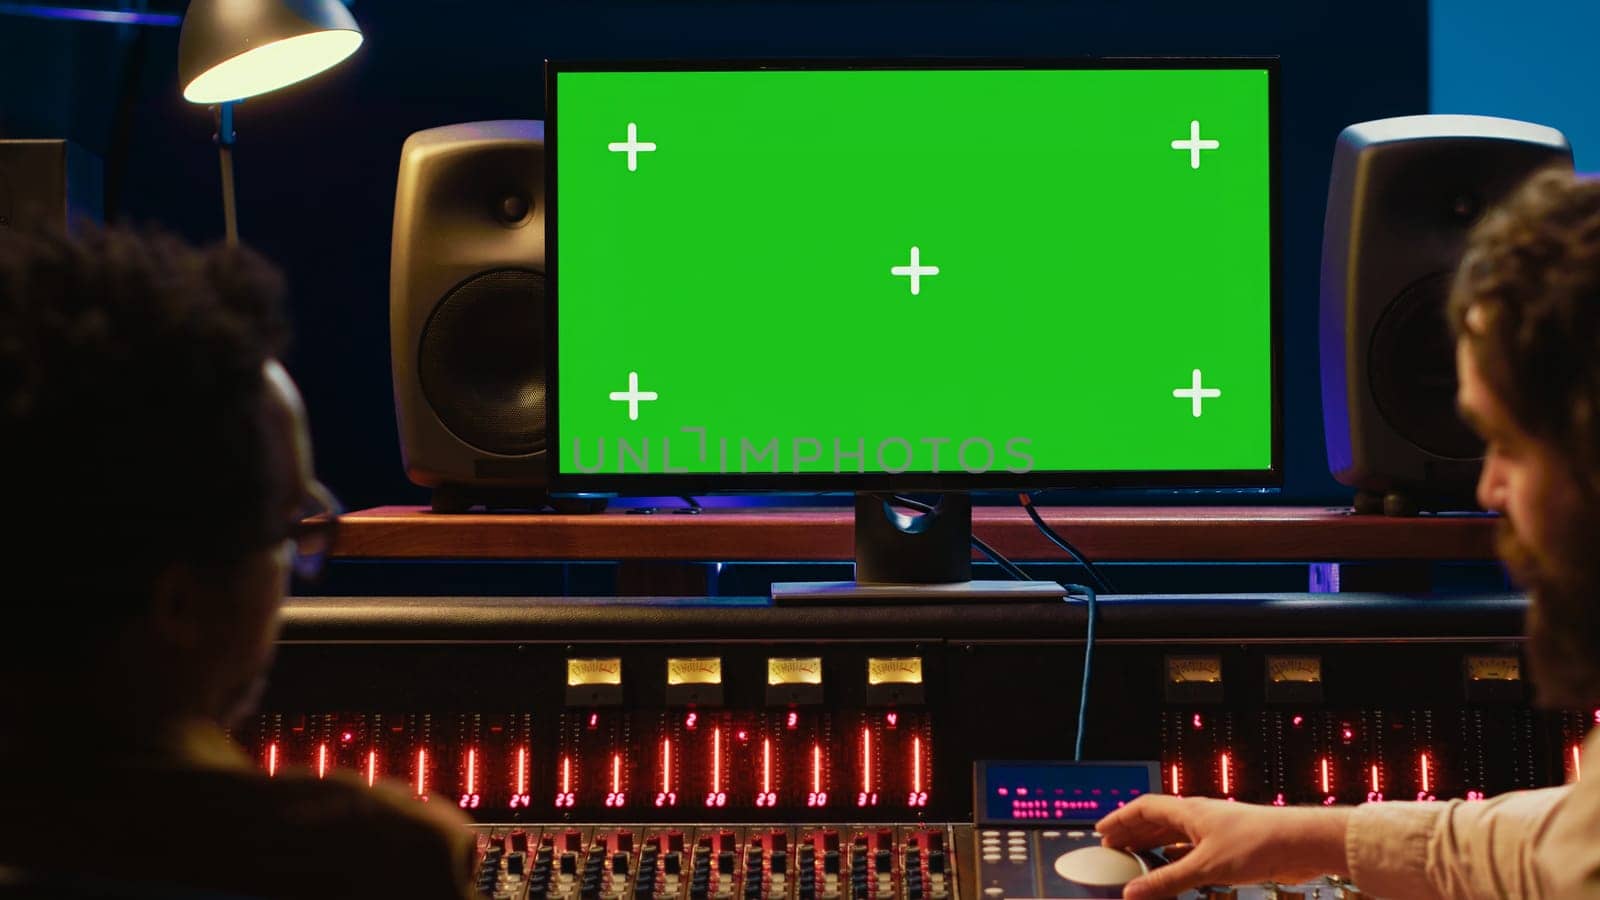 Diverse skilled artists working with isolated mockup display on pc, mixing and mastering tracks before creating a hit. People operating on control room console with knobs and sliders. Camera A.